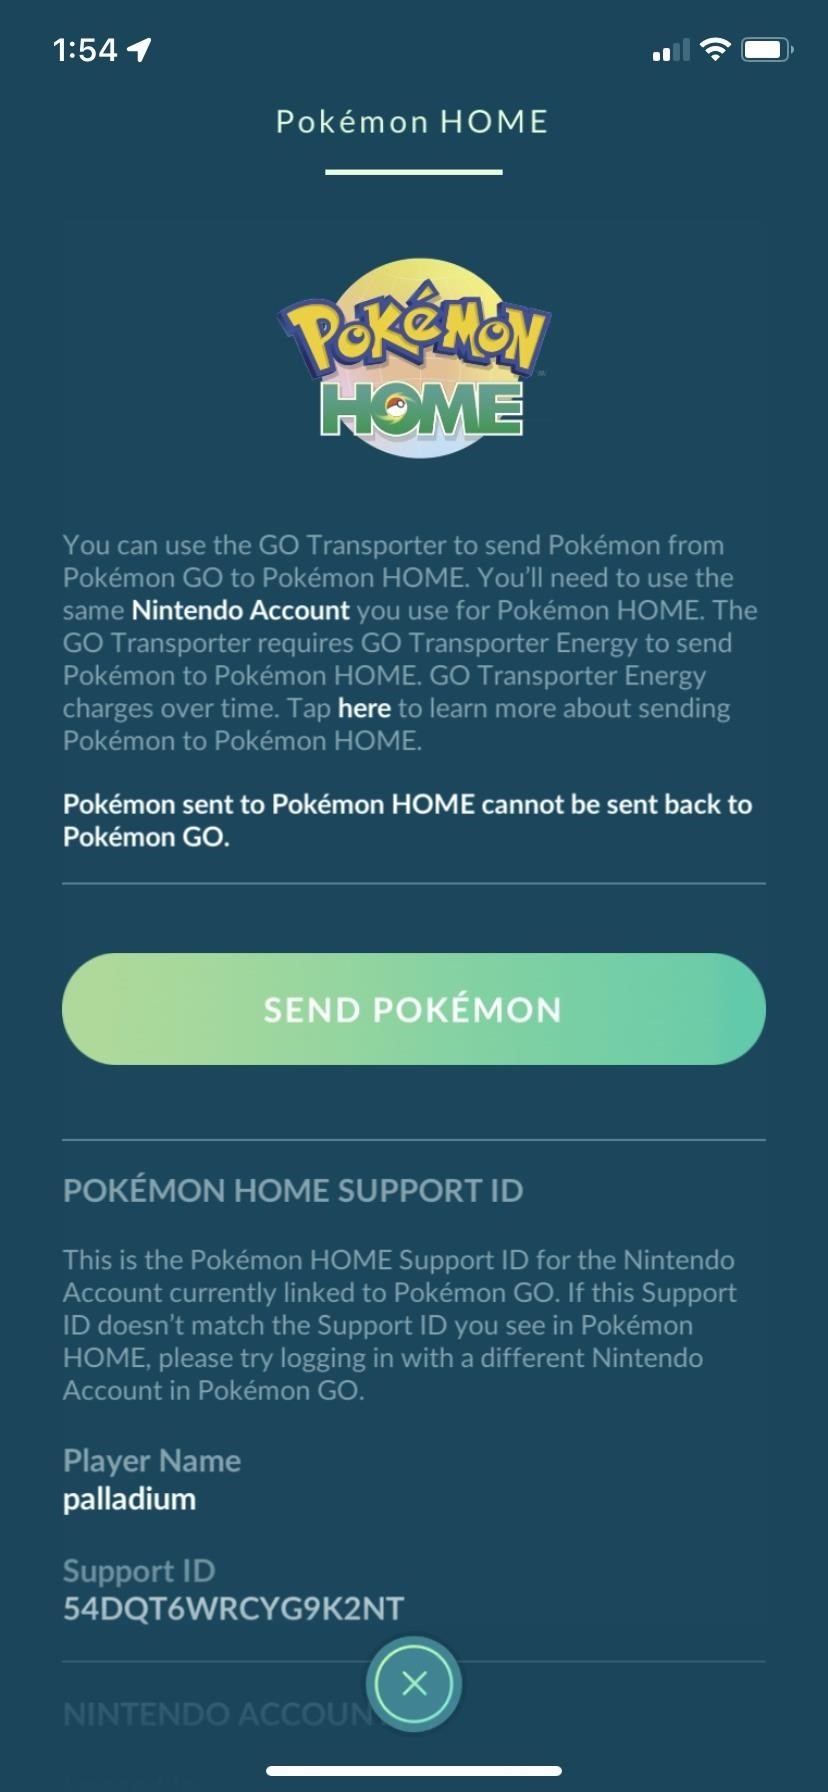 Play Pokémon Go Like a Pro with These Companion Apps for iPhone and Android Phones